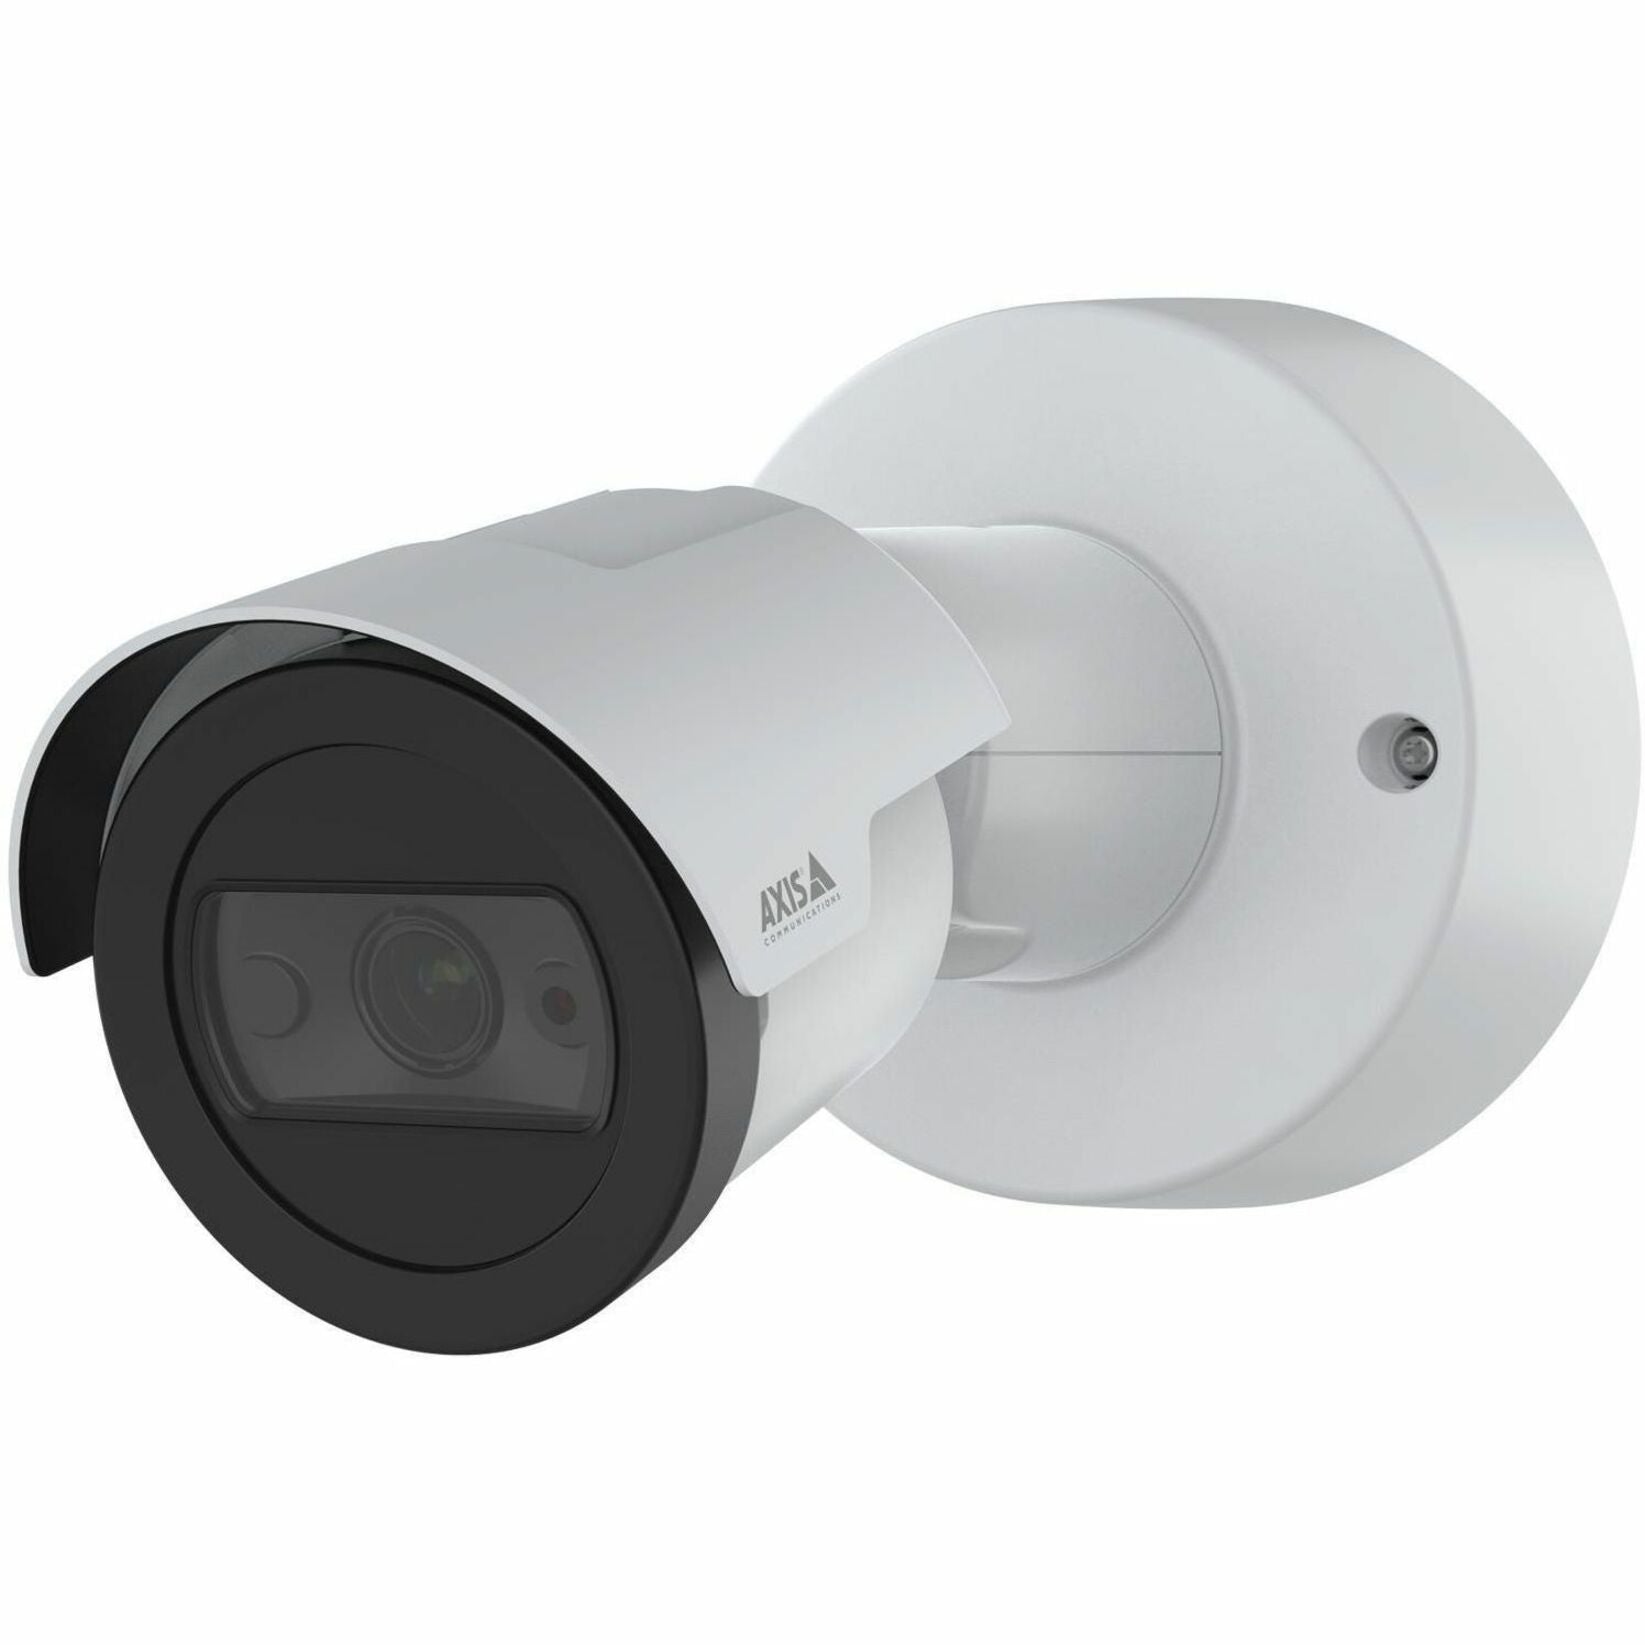 AXIS 02125-001 M2036-LE Network Camera, Motion Detection, Day/Night, Remote Management